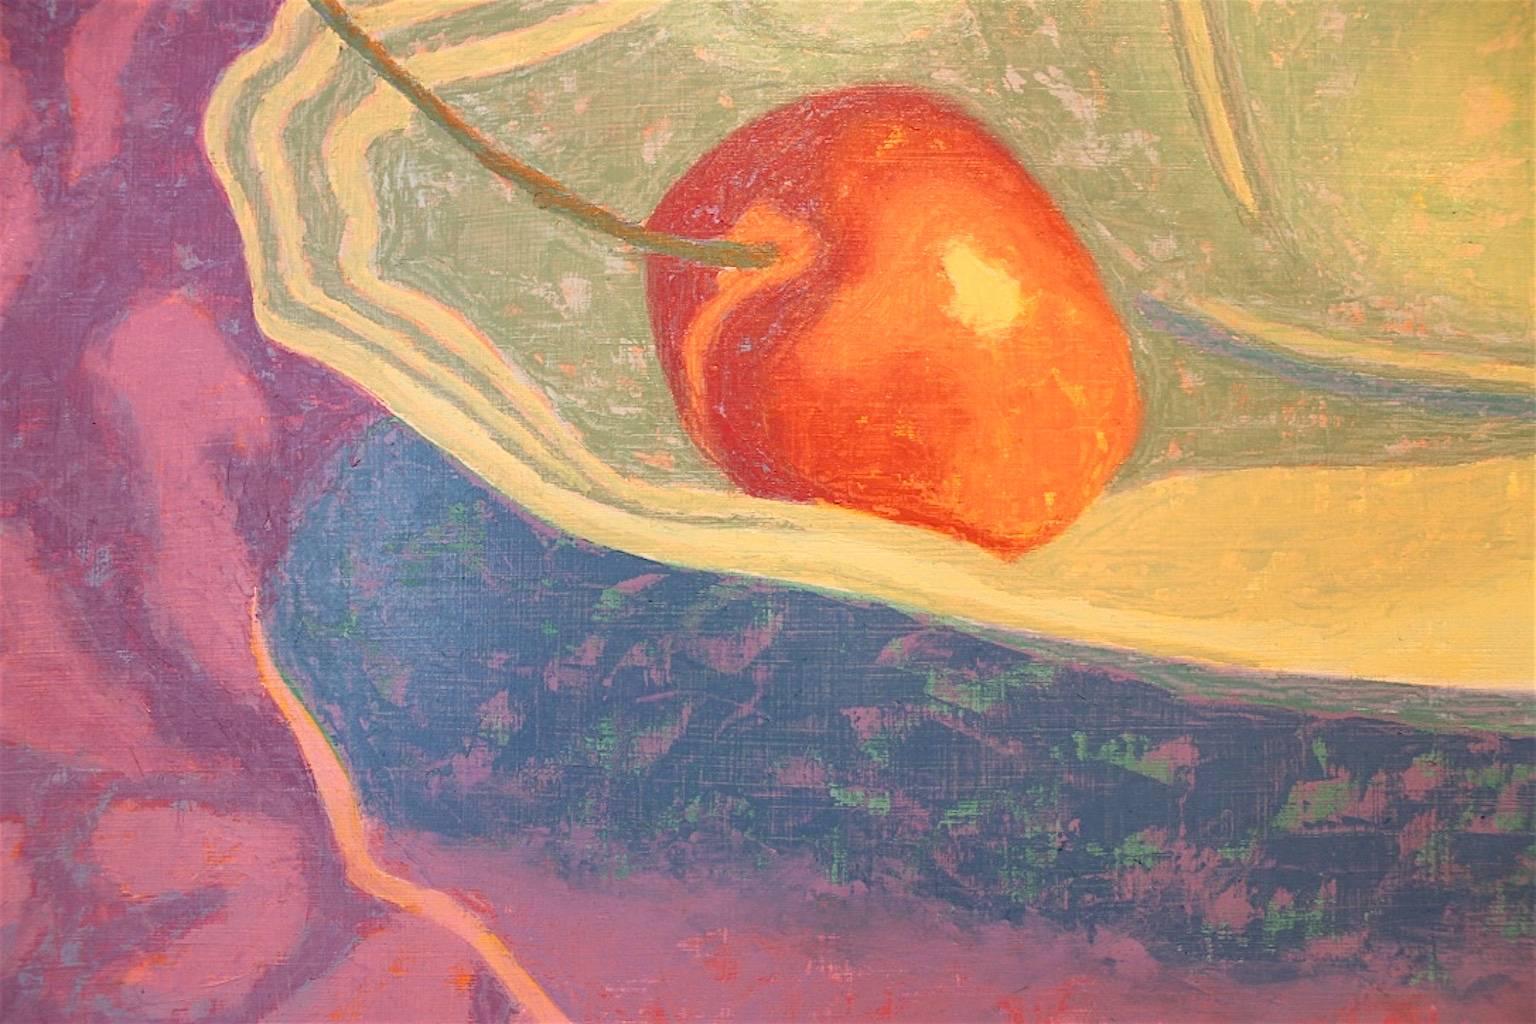 Green Cup With Cherries - Contemporary Painting by Marcia Wise